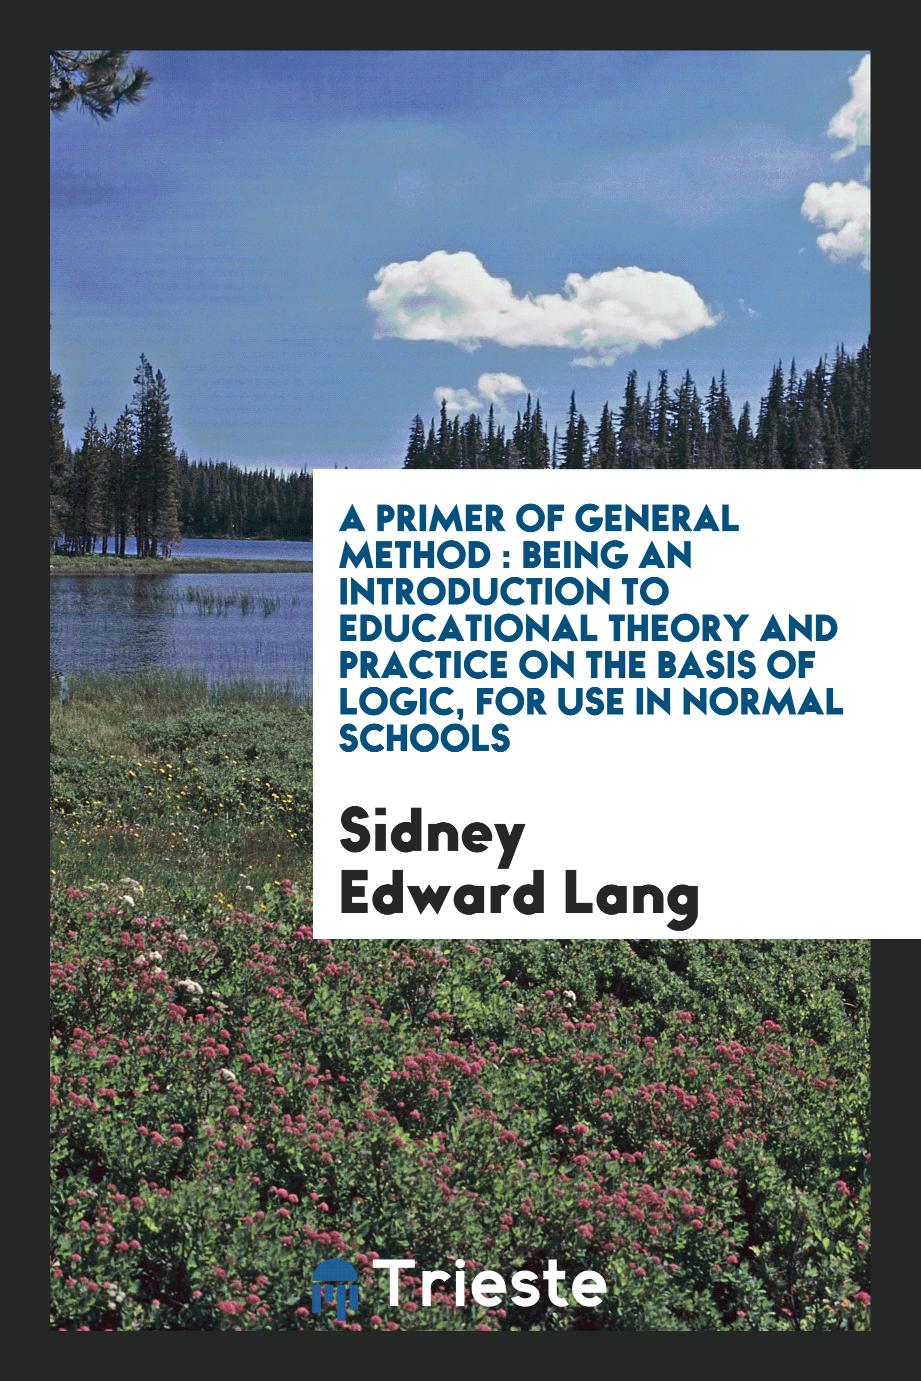 A primer of general method : being an introduction to educational theory and practice on the basis of logic, for use in normal schools